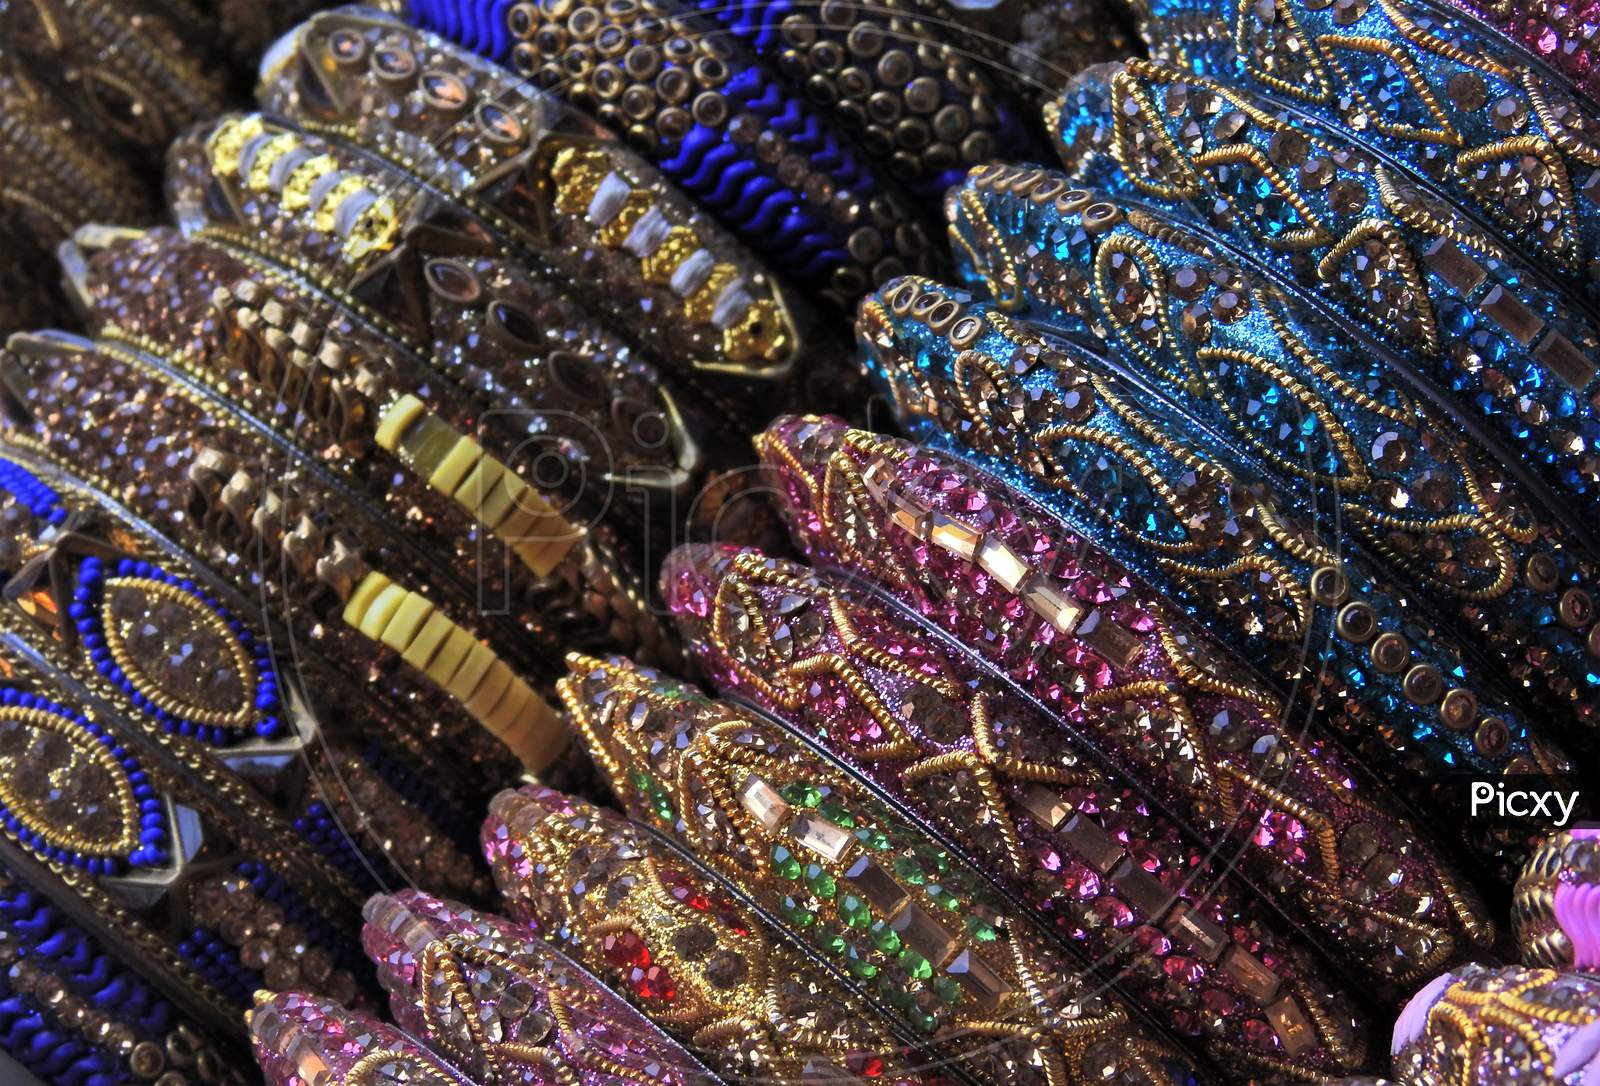 Indian Woman Fashion Or Traditional Accessories Bangle In Shop Display